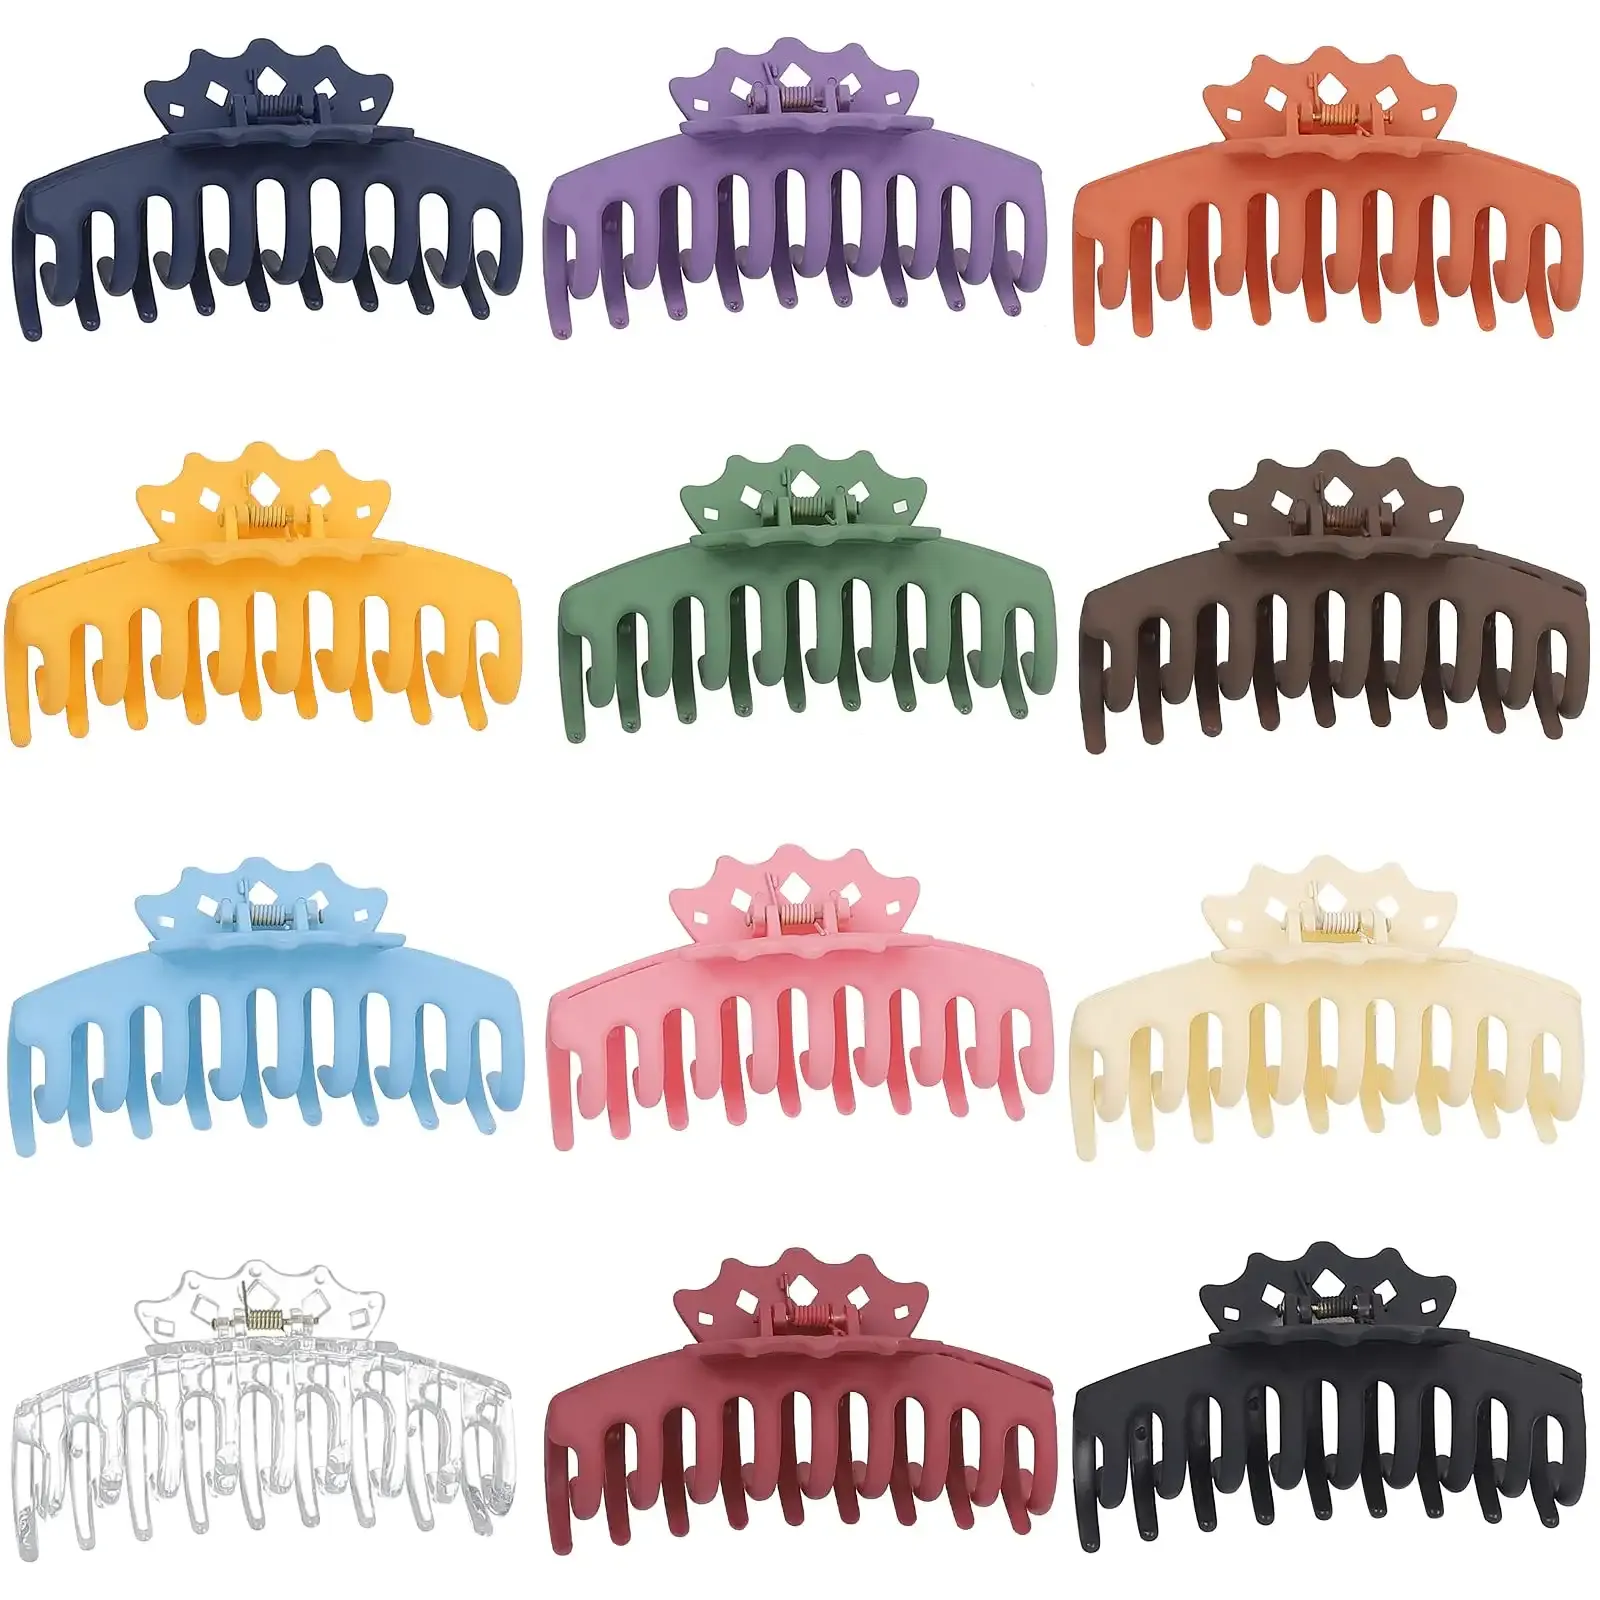 Hair Clips Barrettes Crown Design Large Claw For Women Matte Big Thick Banana Thin 4 2 Strong Nonslip Long Curly Styling Accessories Amxja